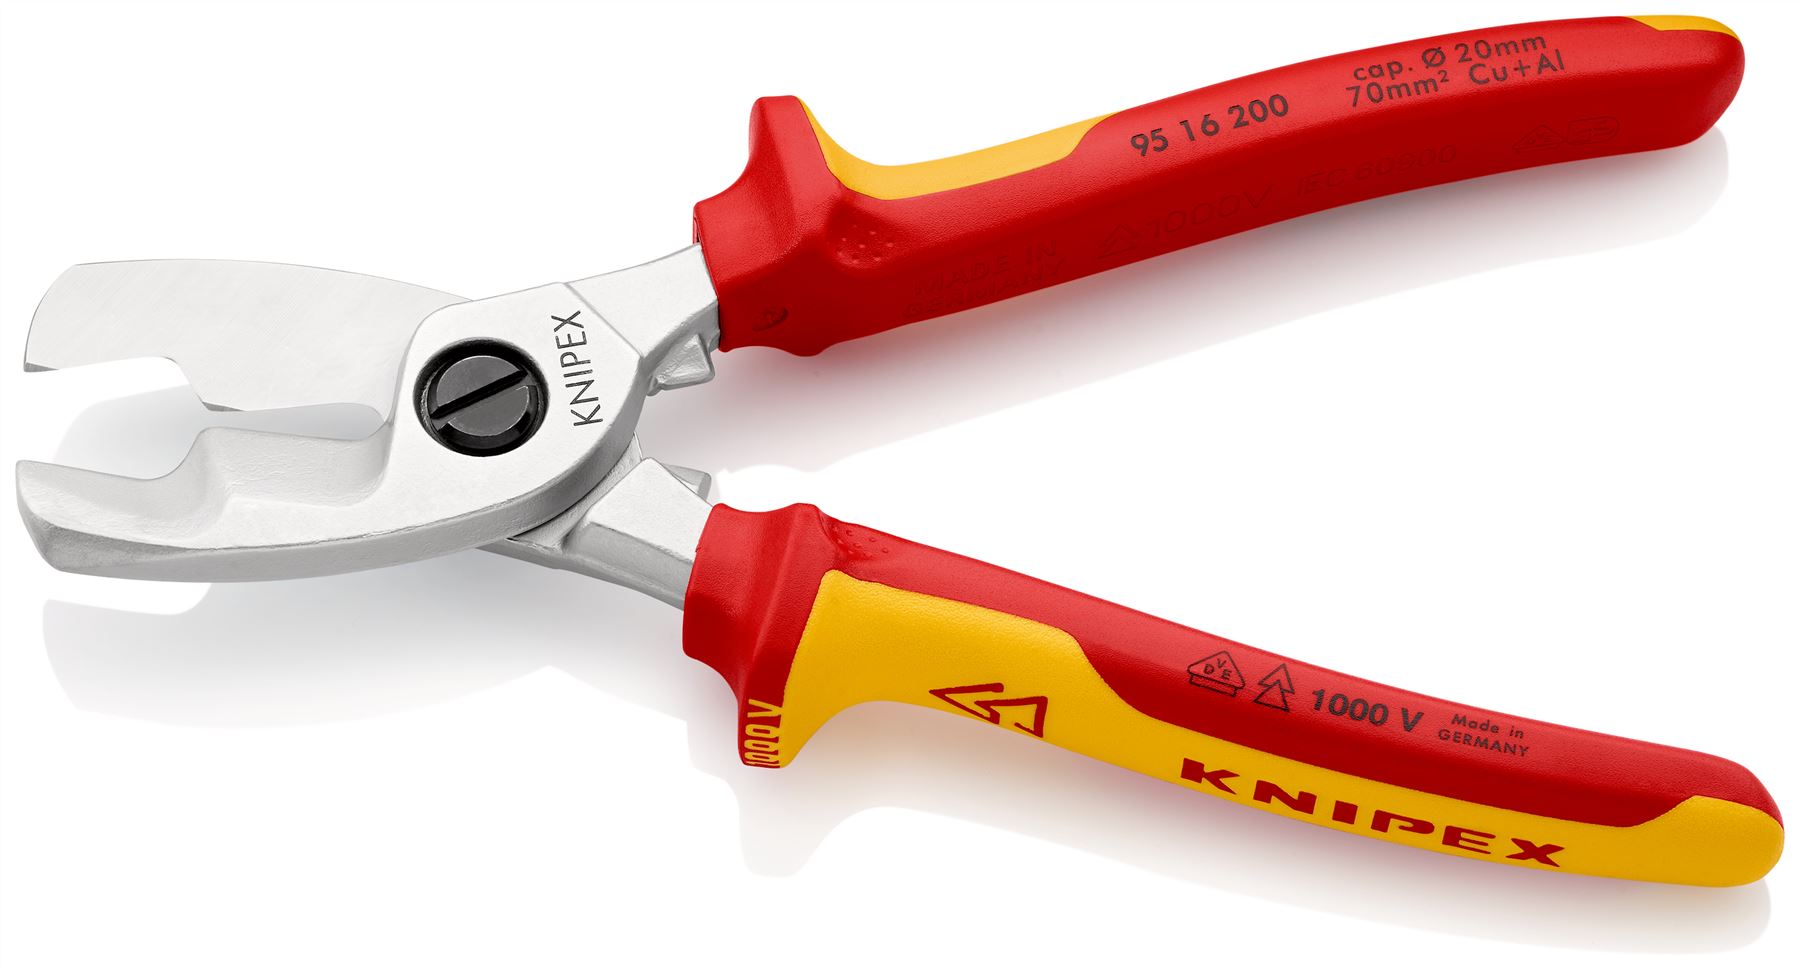 KNIPEX Cable Shears with Twin Cutting Edge 20mm Diameter Capacity 200mm VDE Multi Component Grips 95 16 200 SB